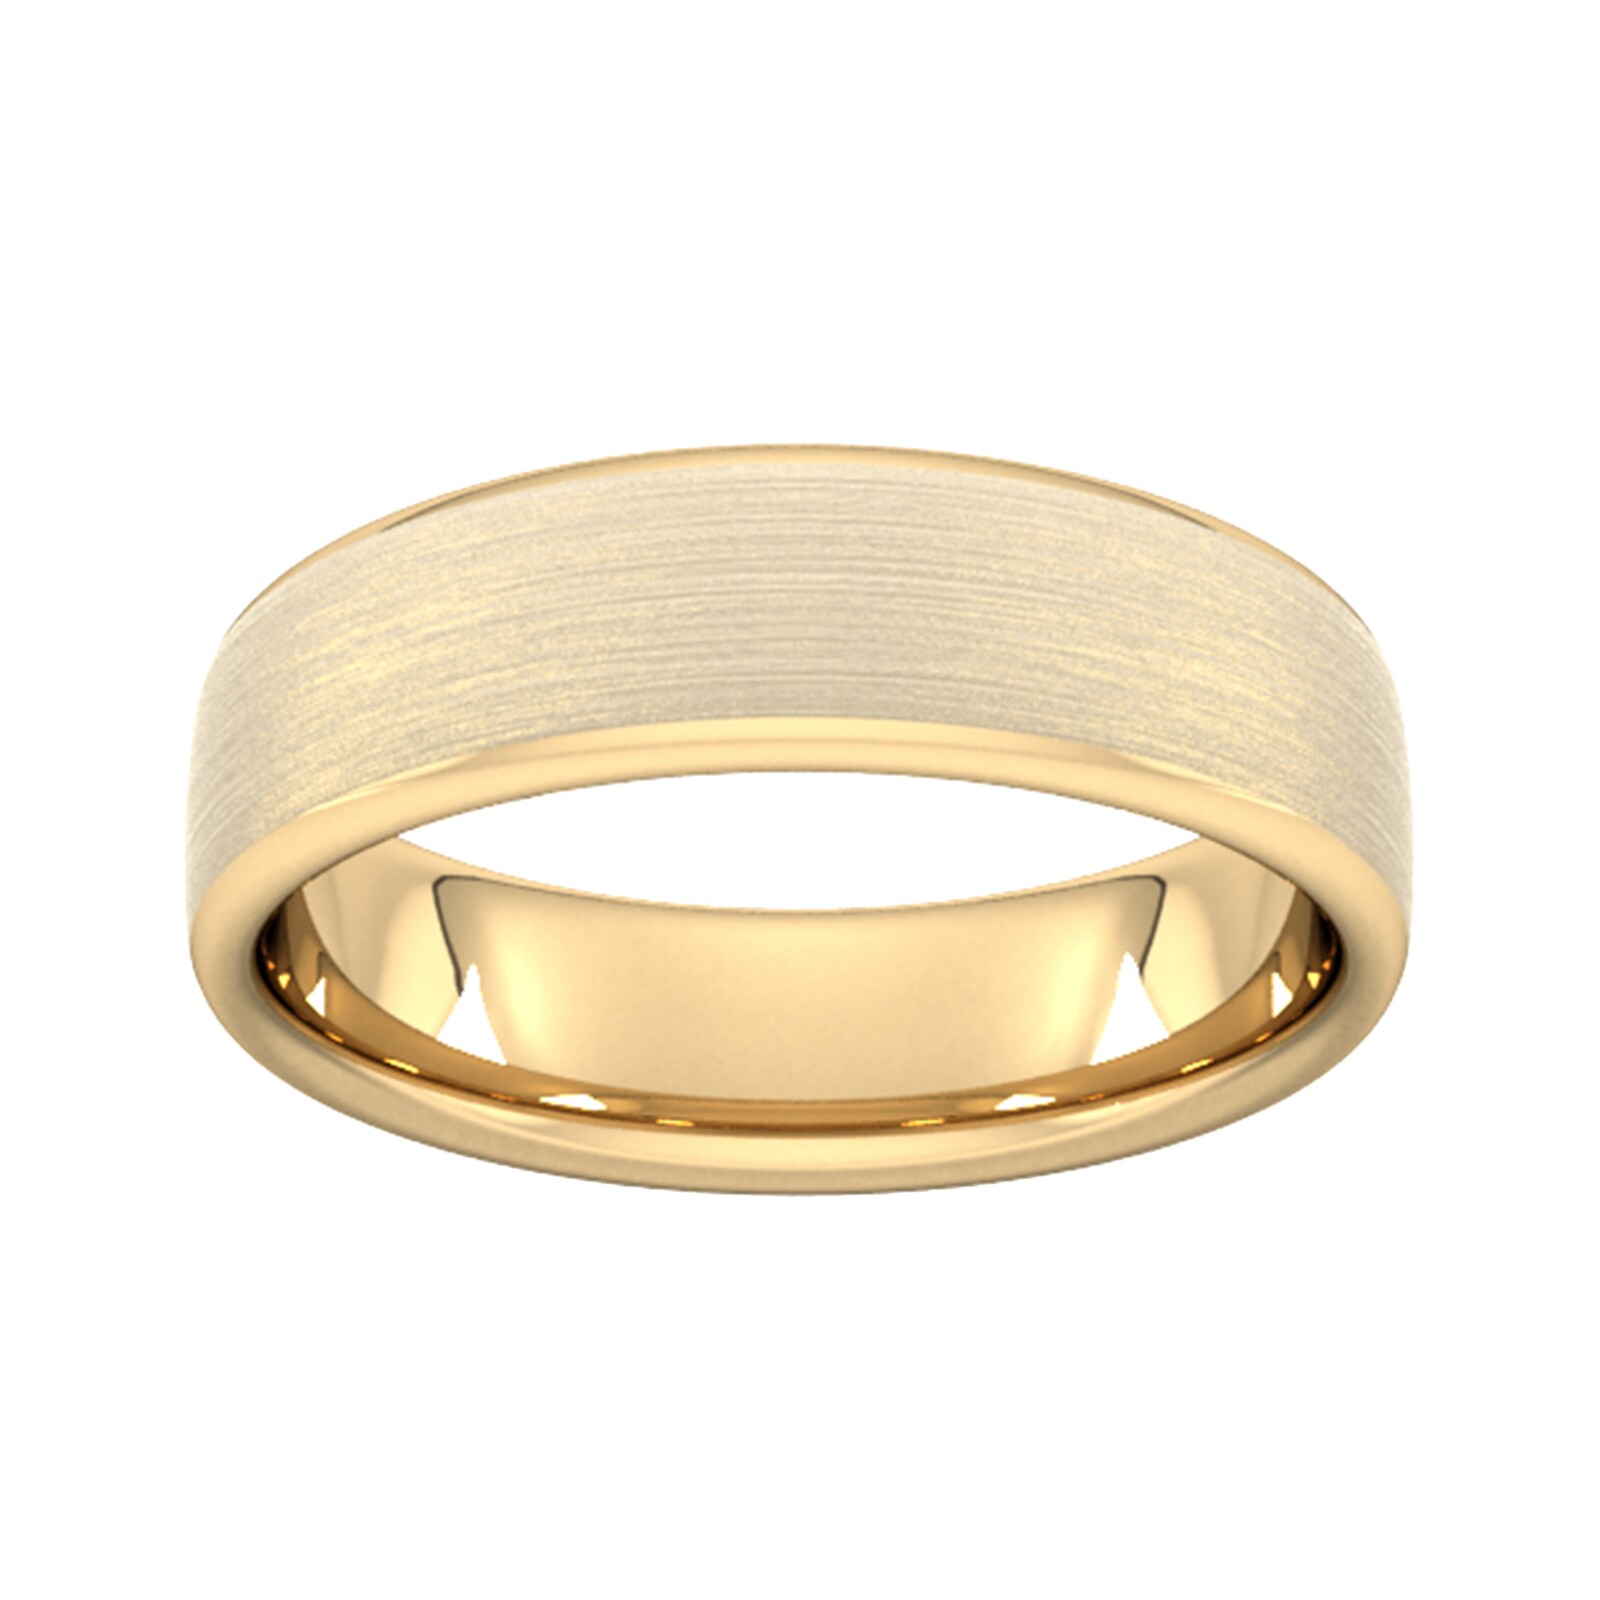 6mm Traditional Court Heavy Matt Finished Wedding Ring In 9 Carat Yellow Gold - Ring Size W